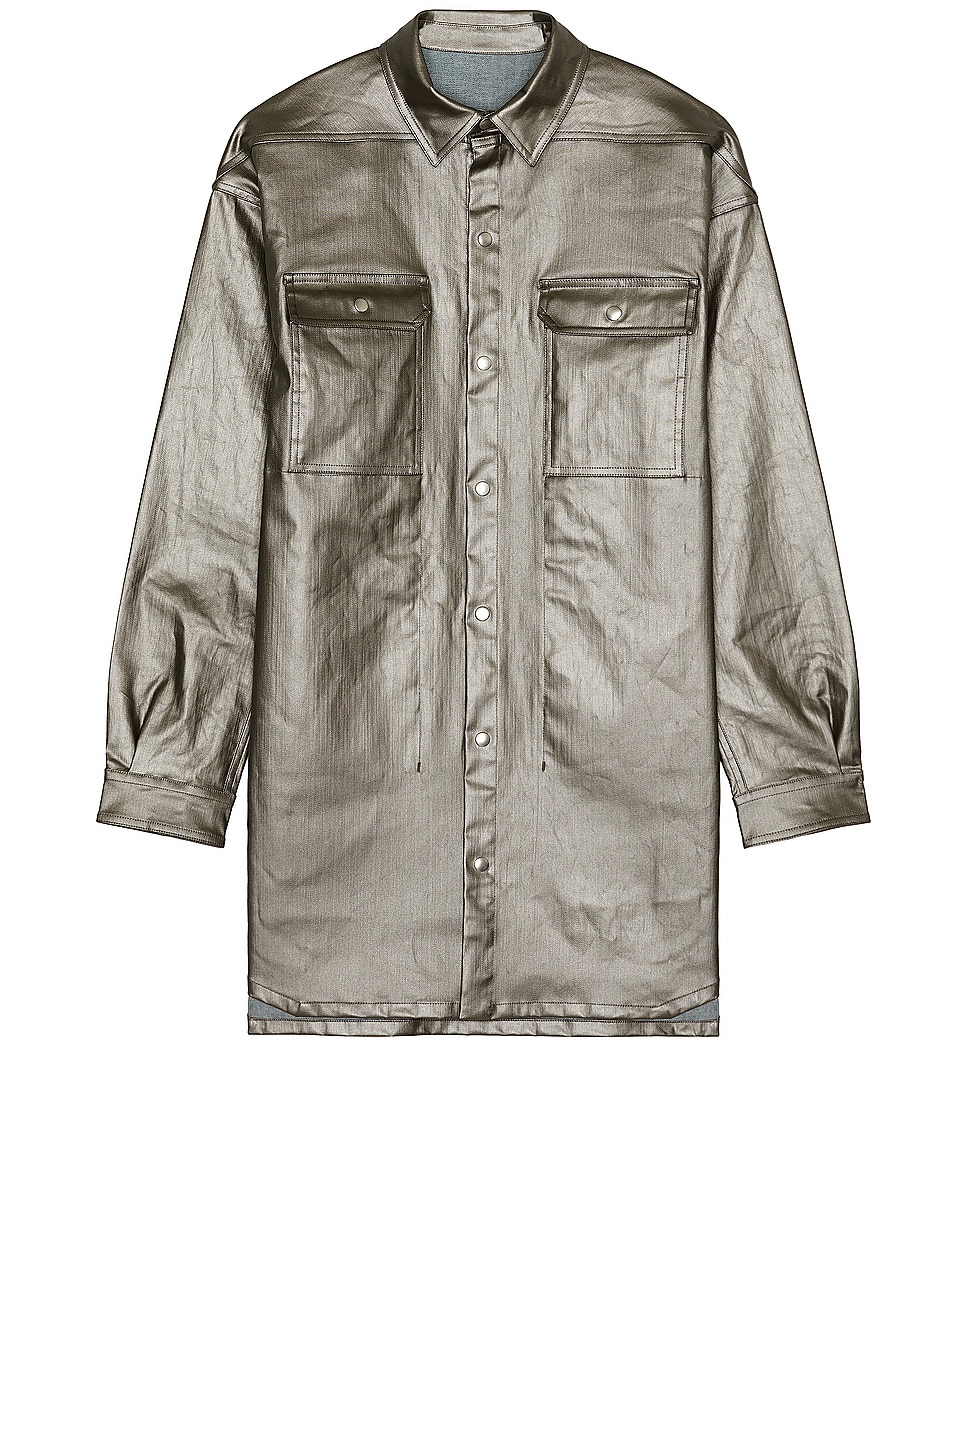 Image 1 of Rick Owens Oversized Outer Shirt in Gun Metal